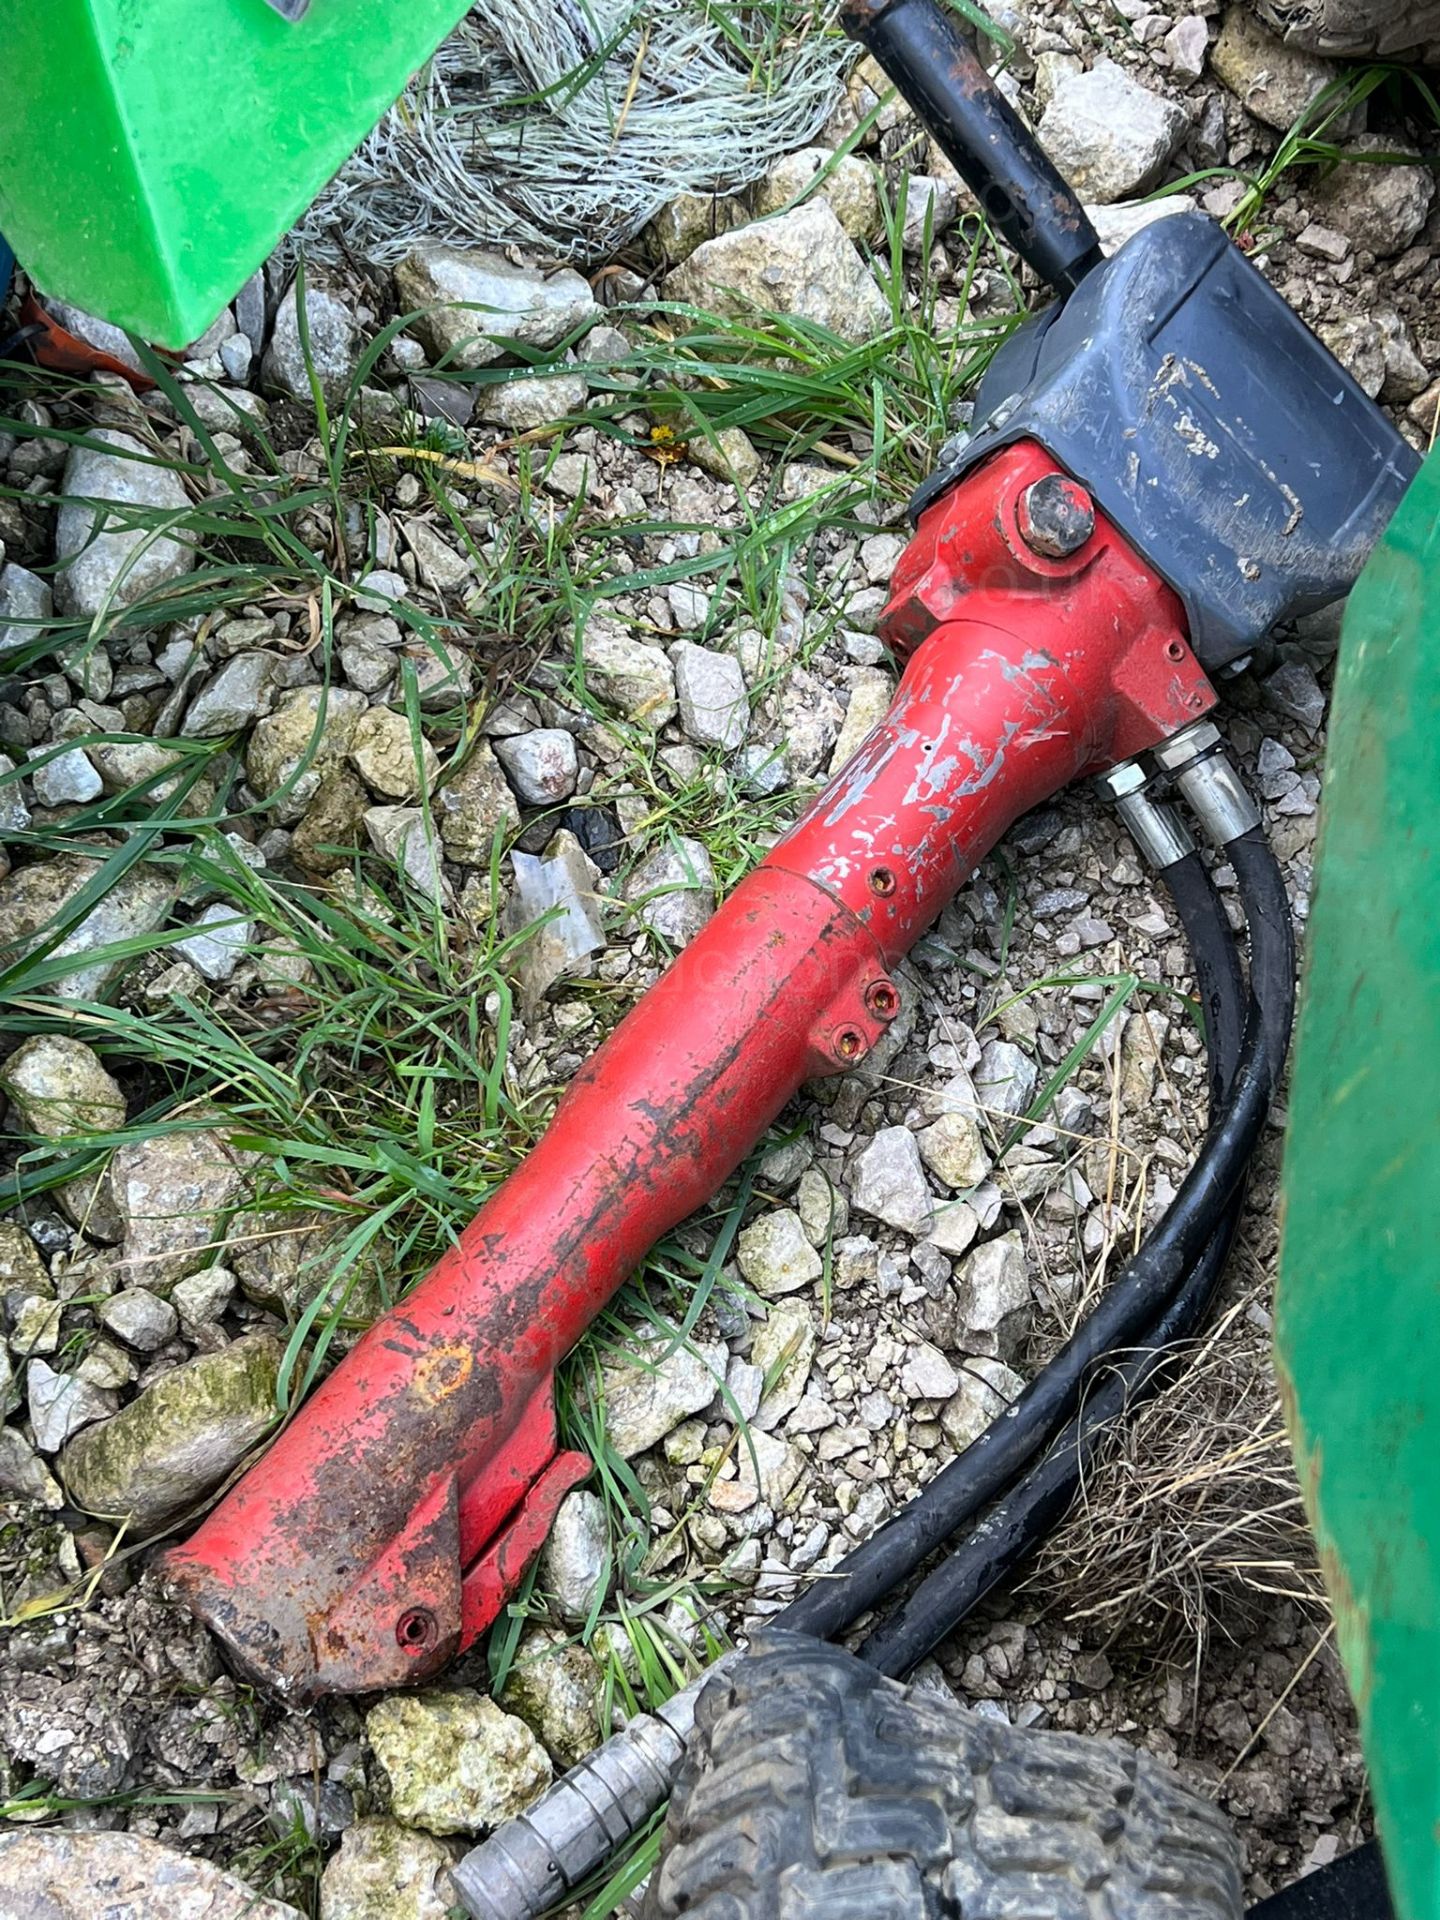 RED HYDRAULIC GUN WITH HOSES, NO CHISEL, BELIEVED TO BE WORKING *PLUS VAT* - Image 3 of 4